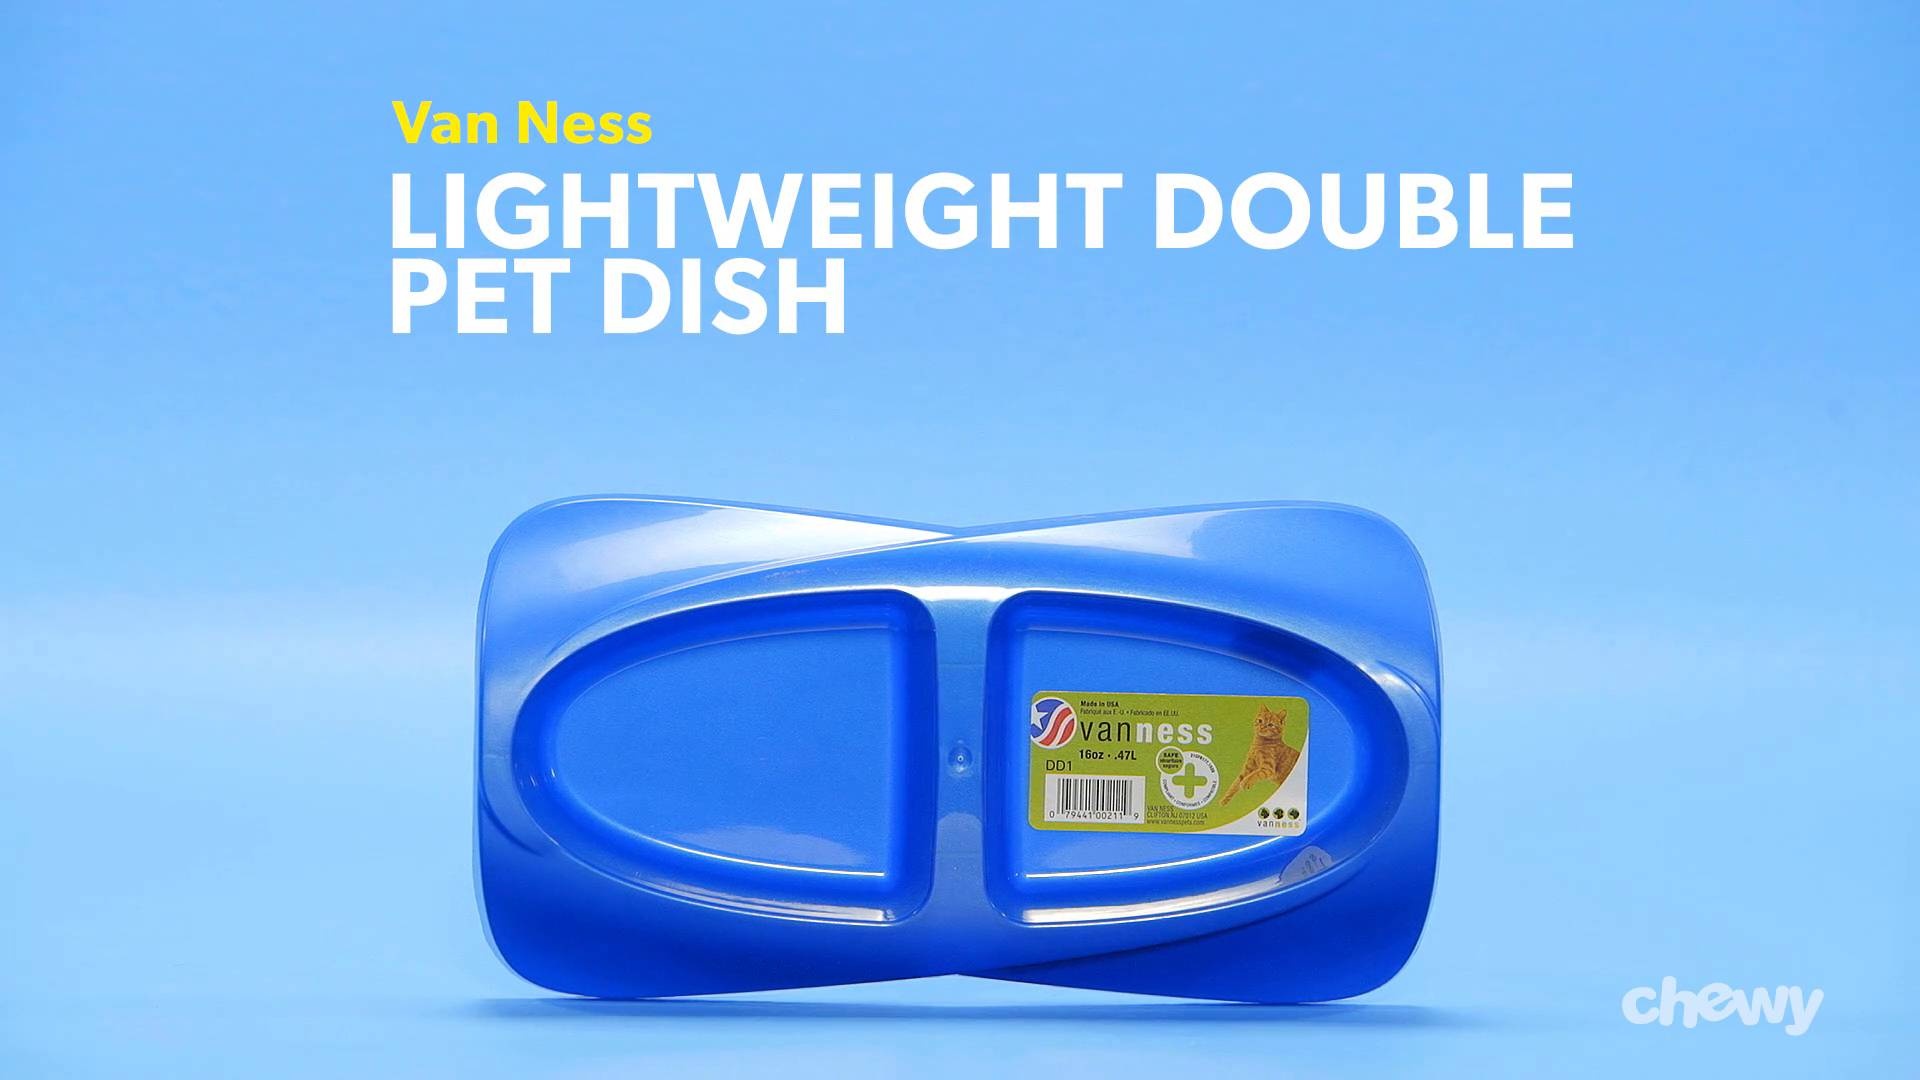 16 Ounce per side Van Ness Lightweight Small Double Dish